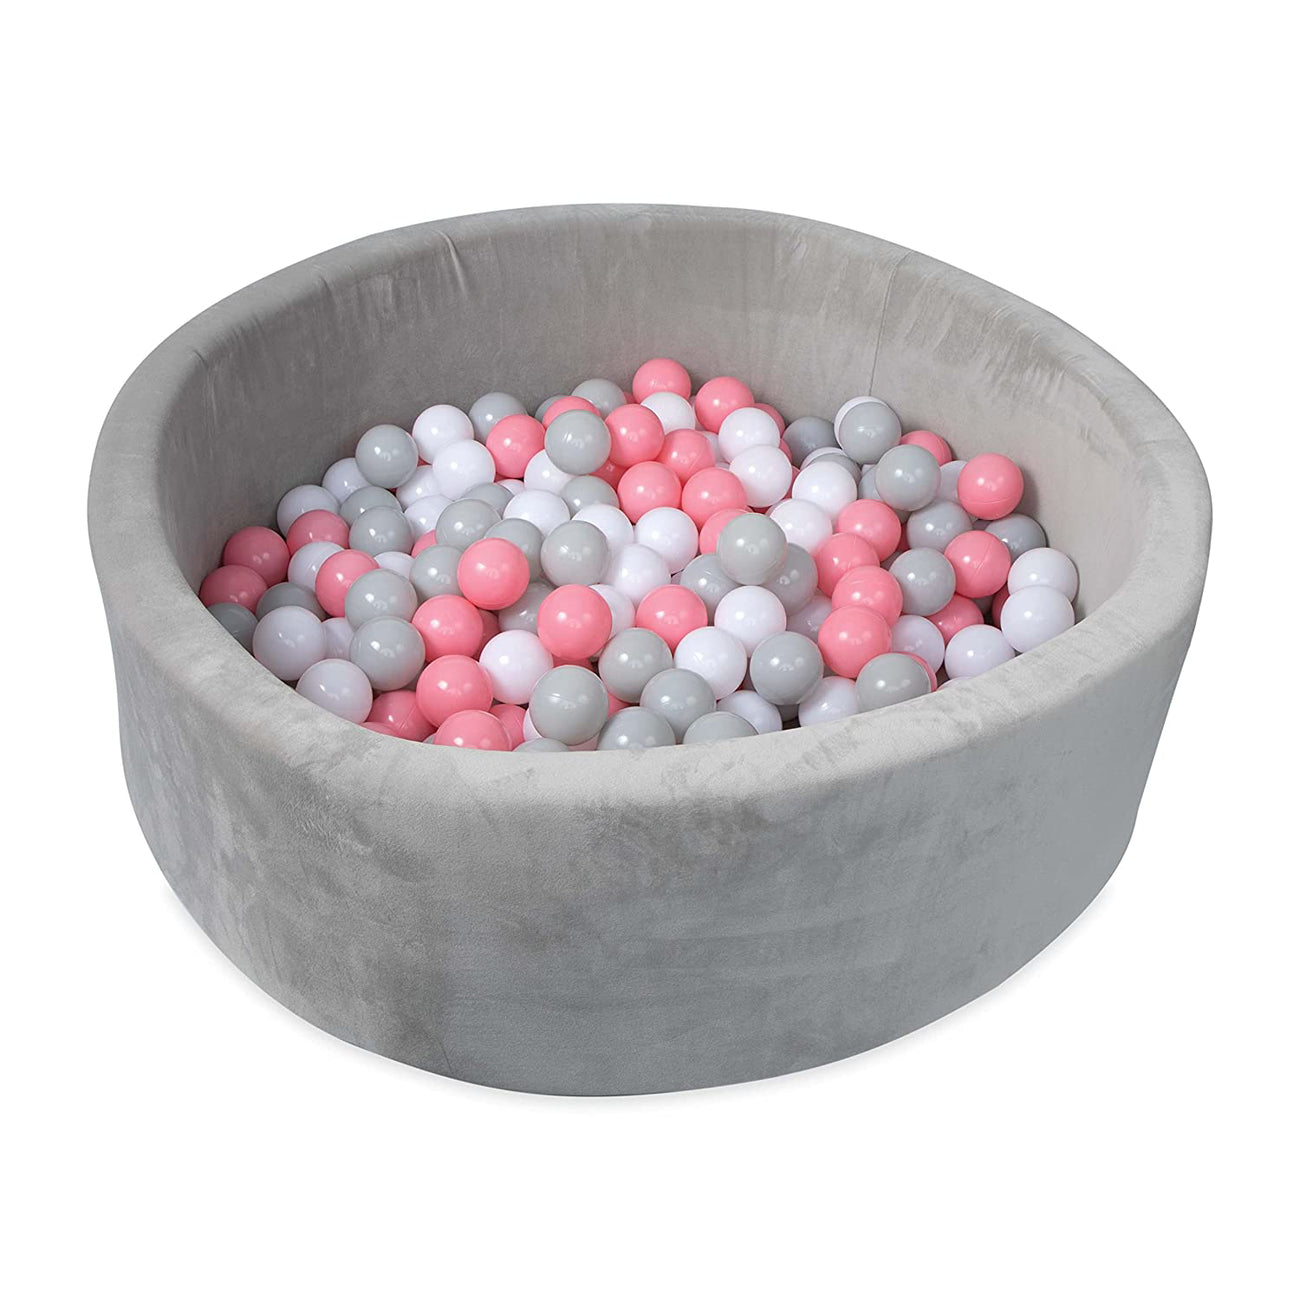 Kids' Ball Pit with 200 Balls - Nuby US